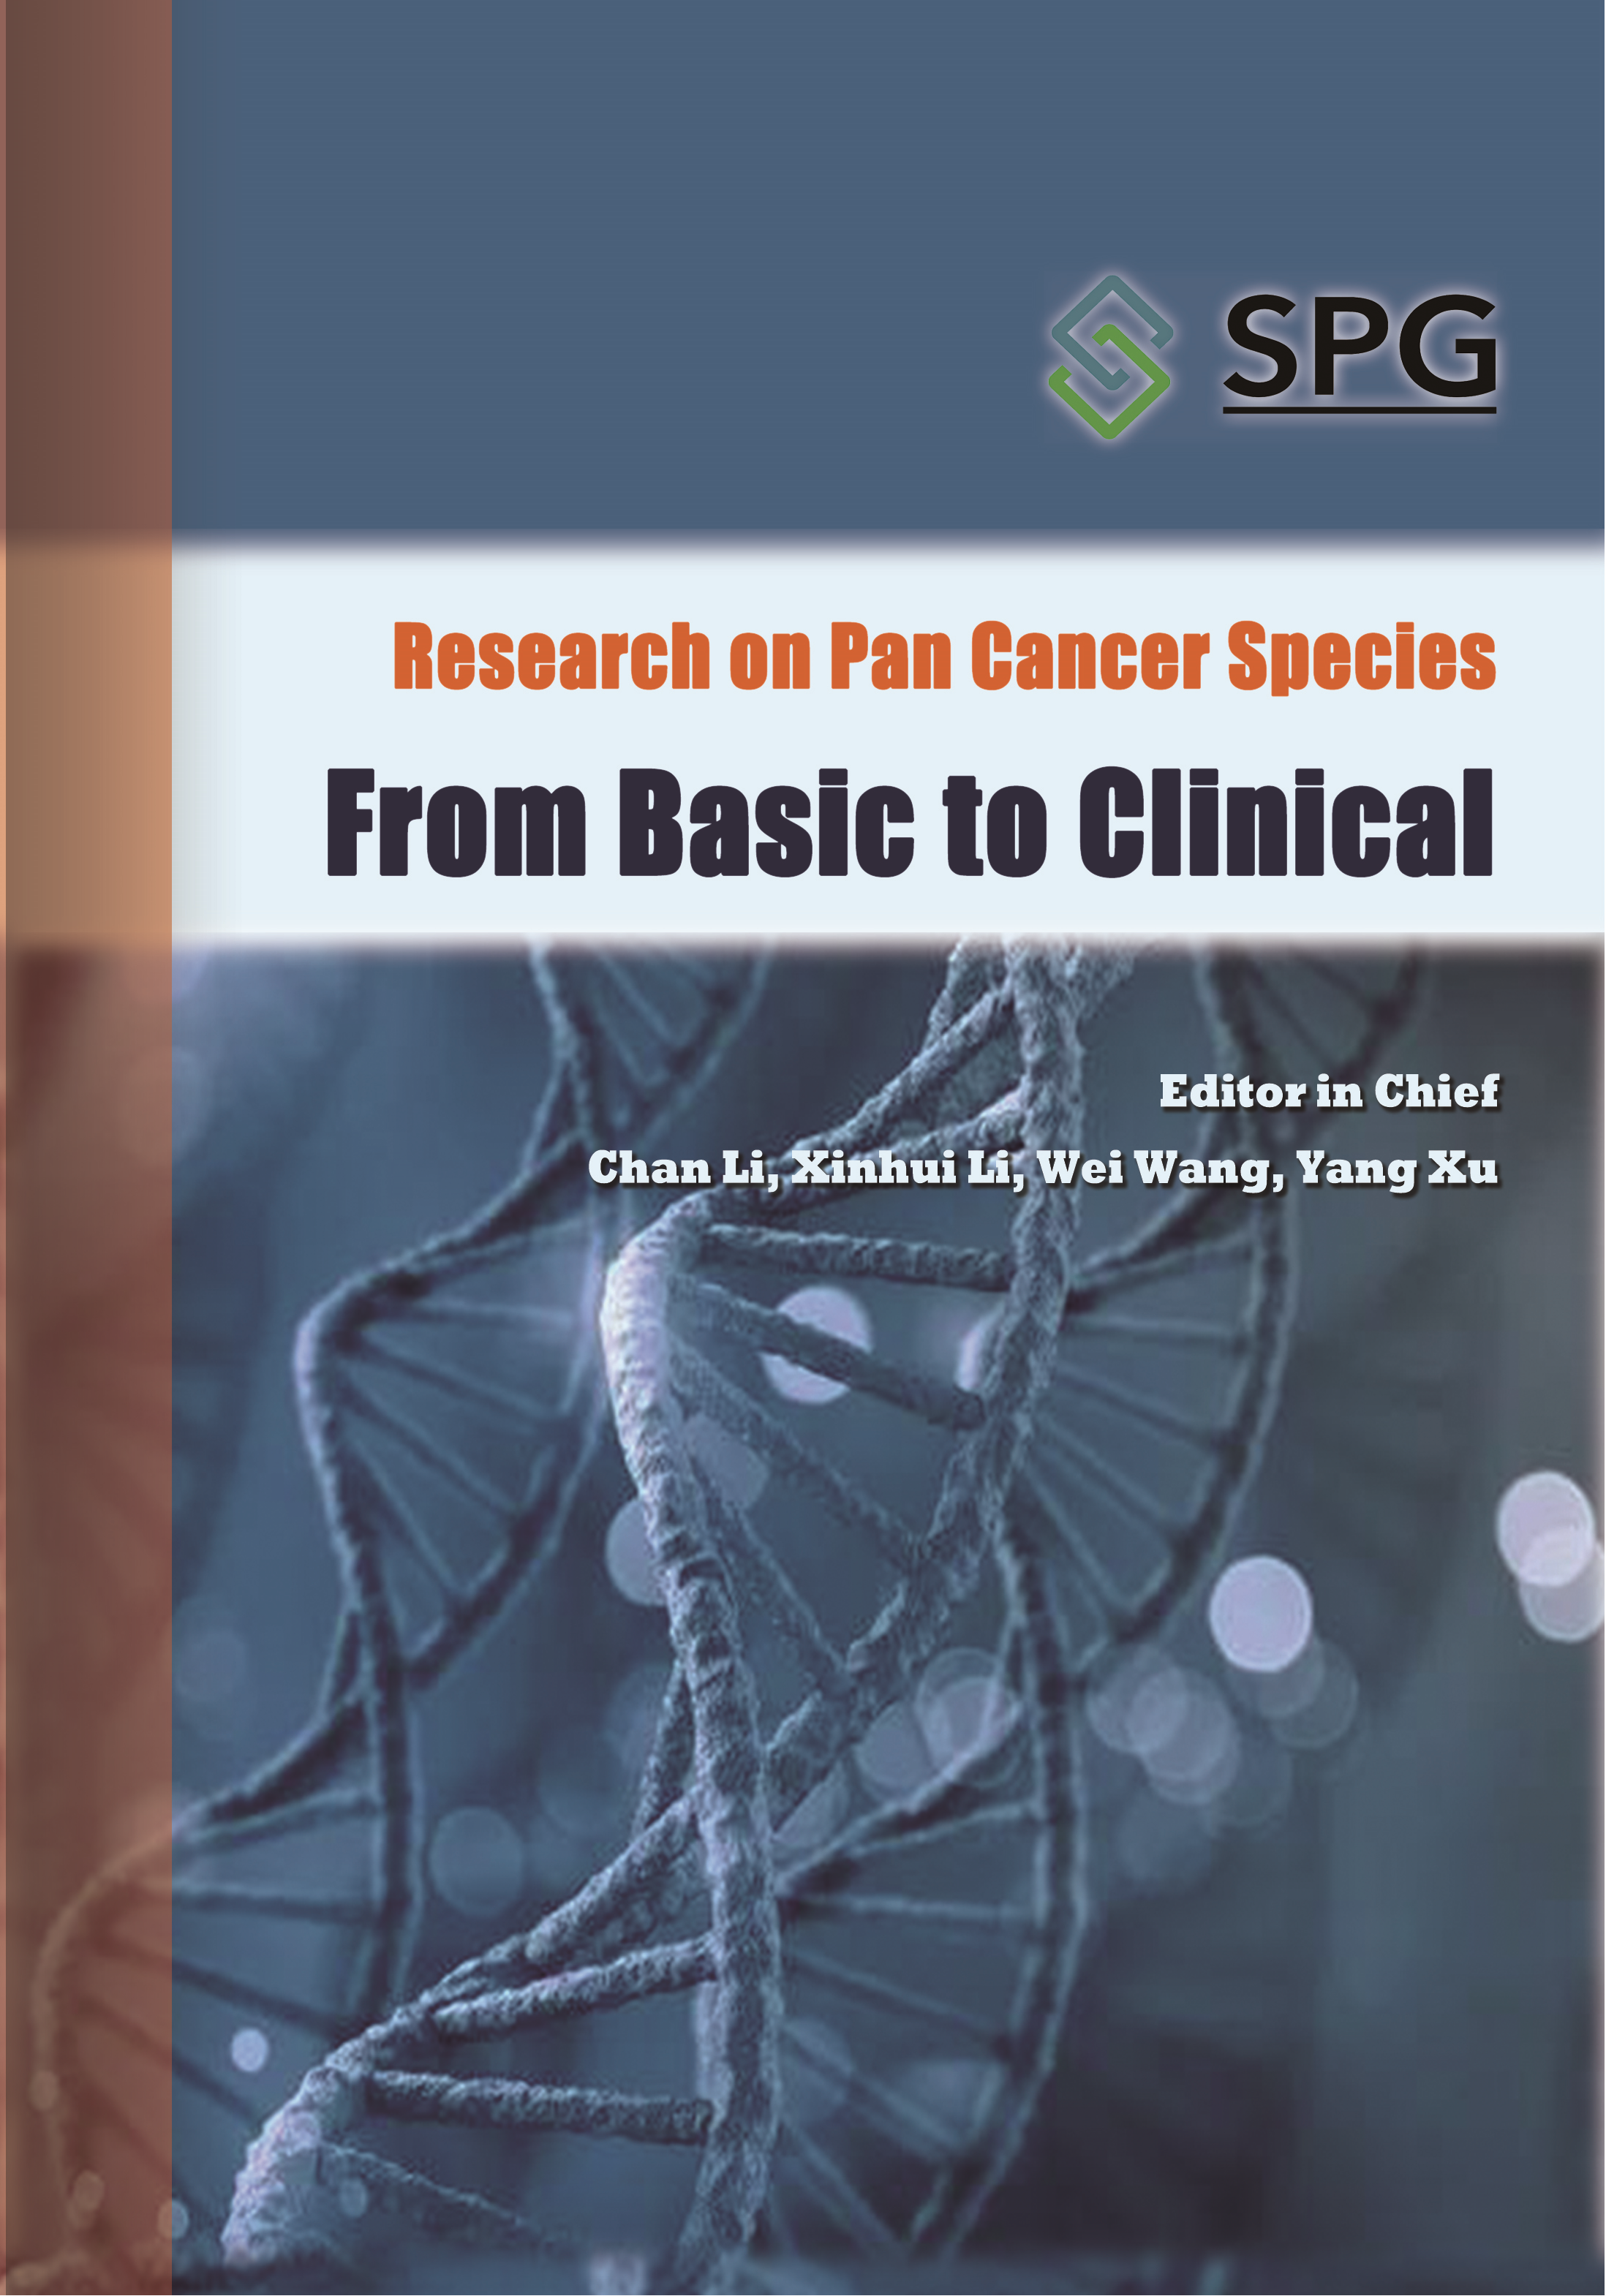 Research on Pan Cancer Species: From Basic to Clinical | Scholar Publishing Group